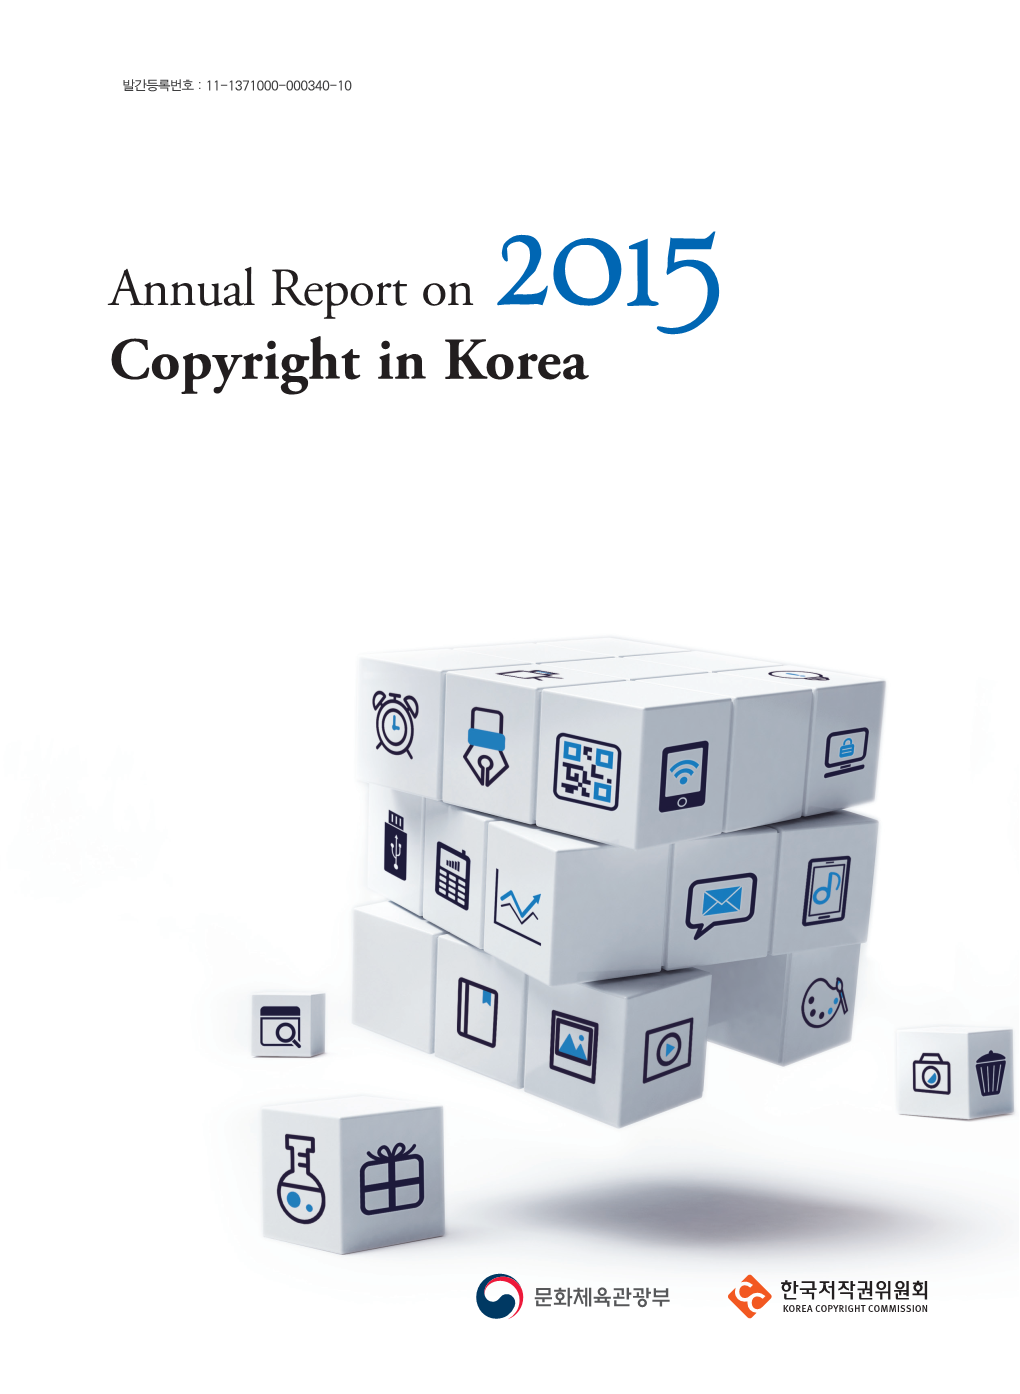 Copyright in Korea on COPYRIGHT in KOREA 2015 ANNUAL REPORT Culture, Sports and Tourism a Message from the Minister Of